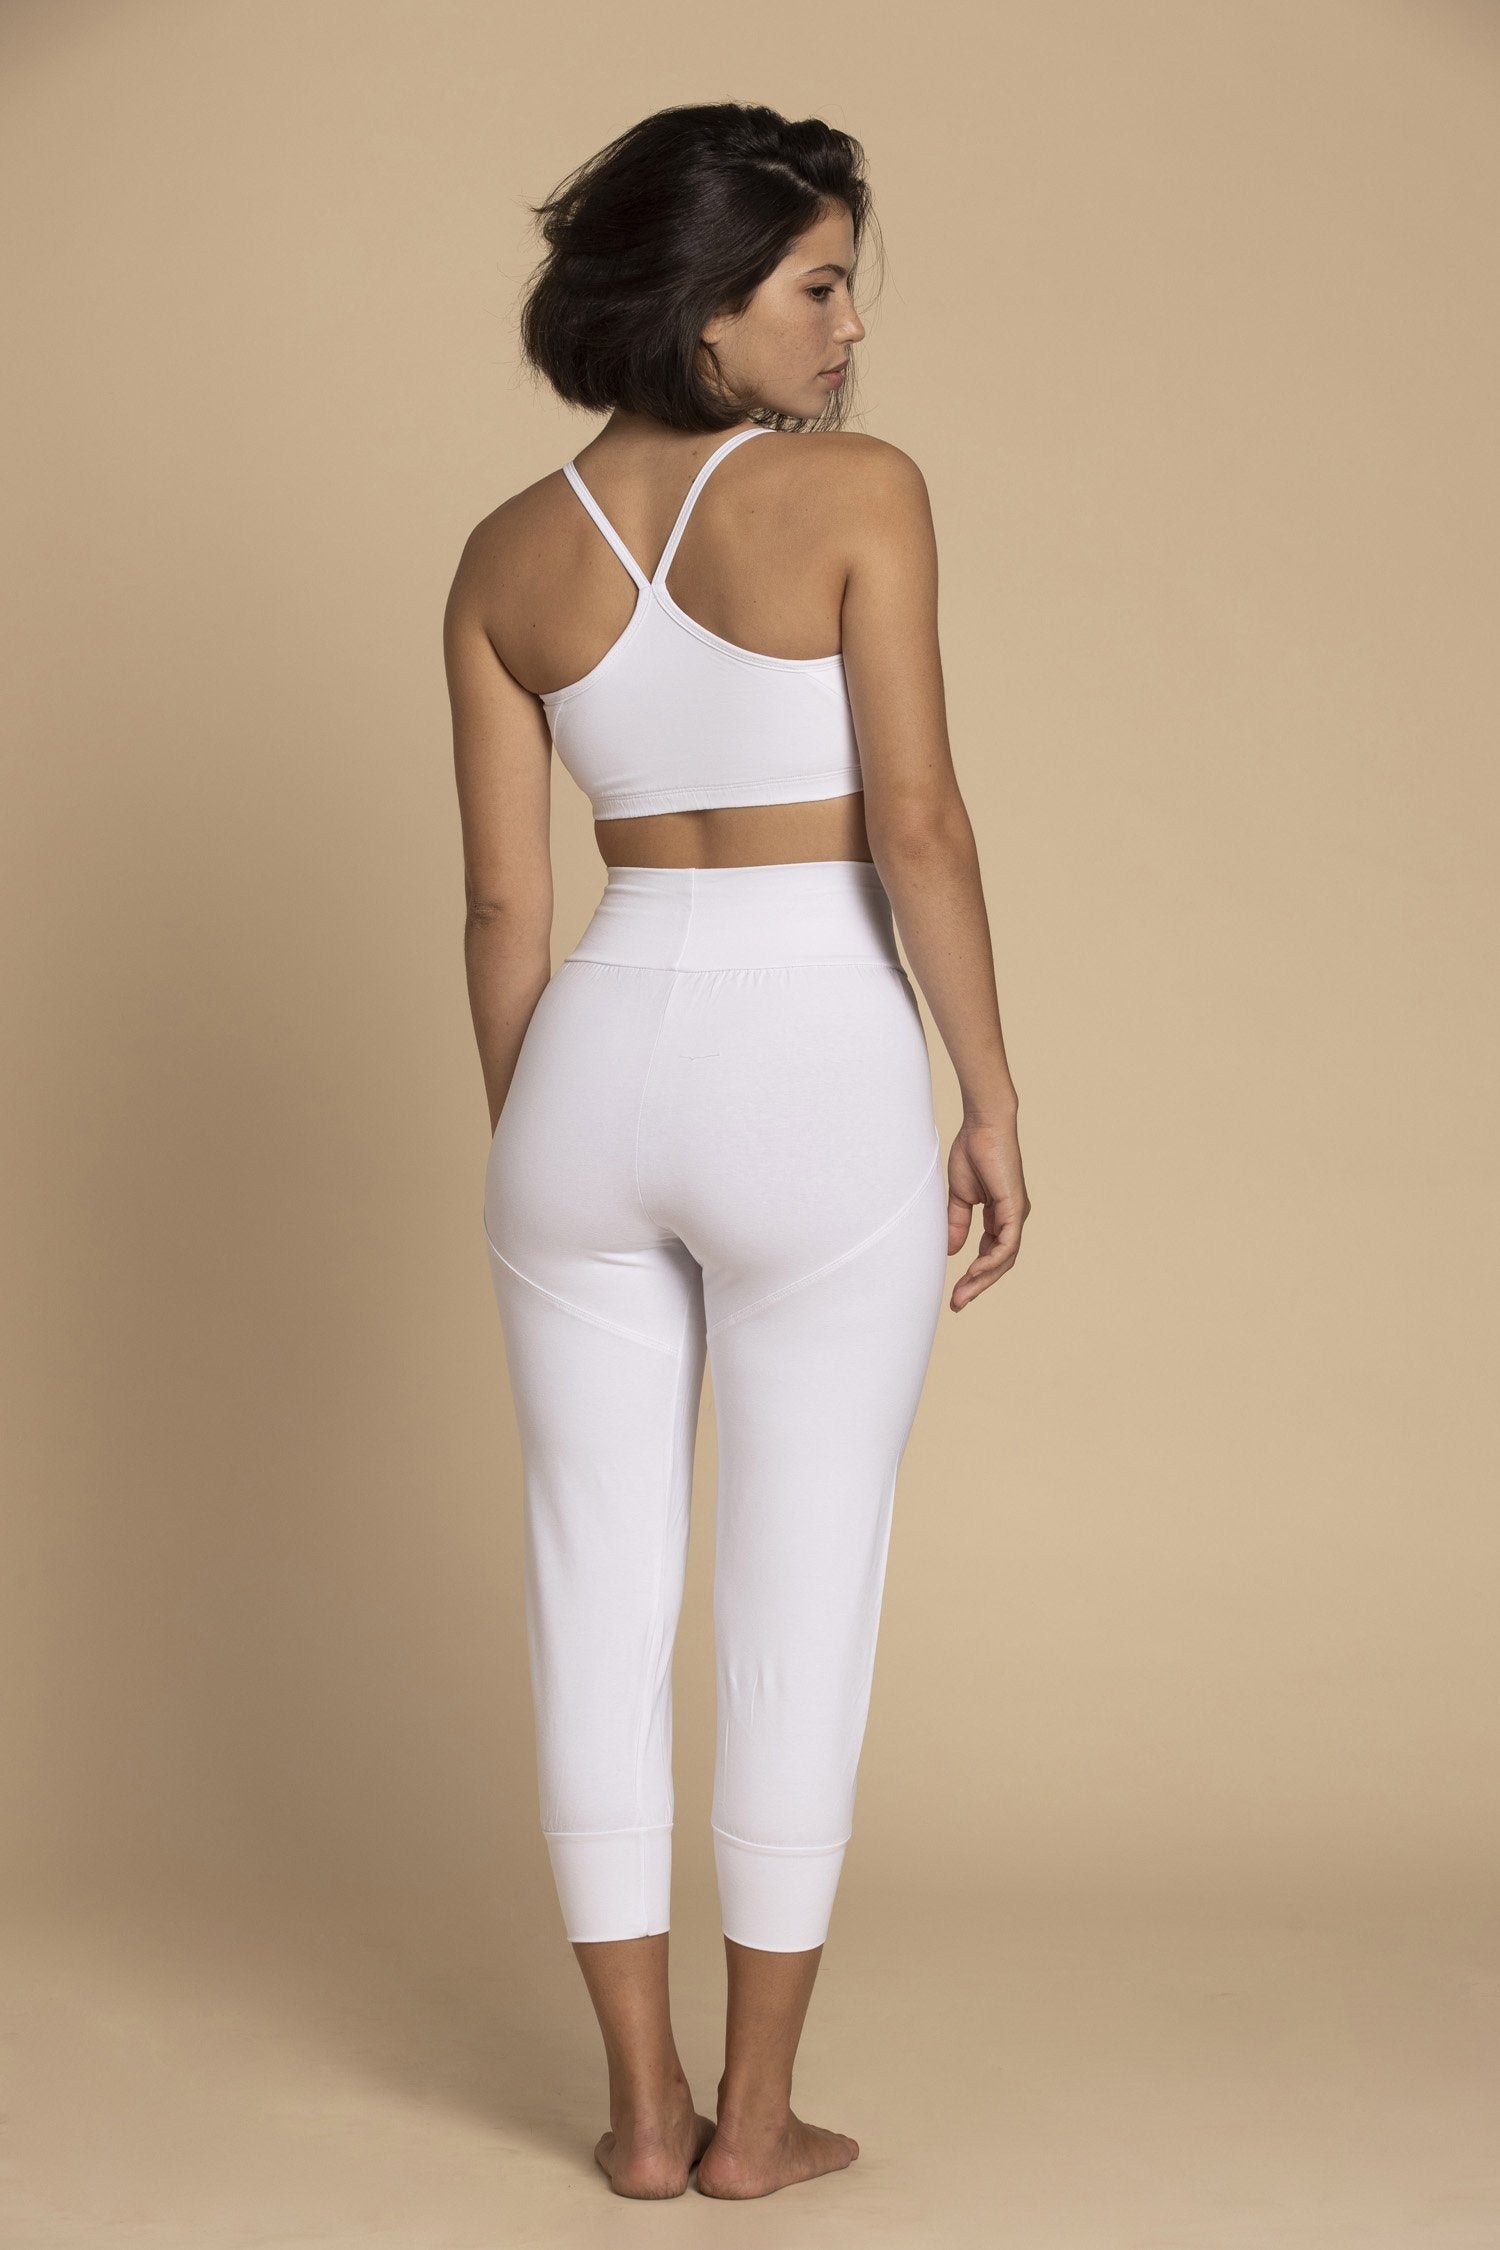 Fashion (White)Women Pure Color Casual Gym Yoga Leggings Slim Sports Pants  Hip Push Up Low Waist Stretchy Workout See Through Sheer Capri Pants DOU @  Best Price Online